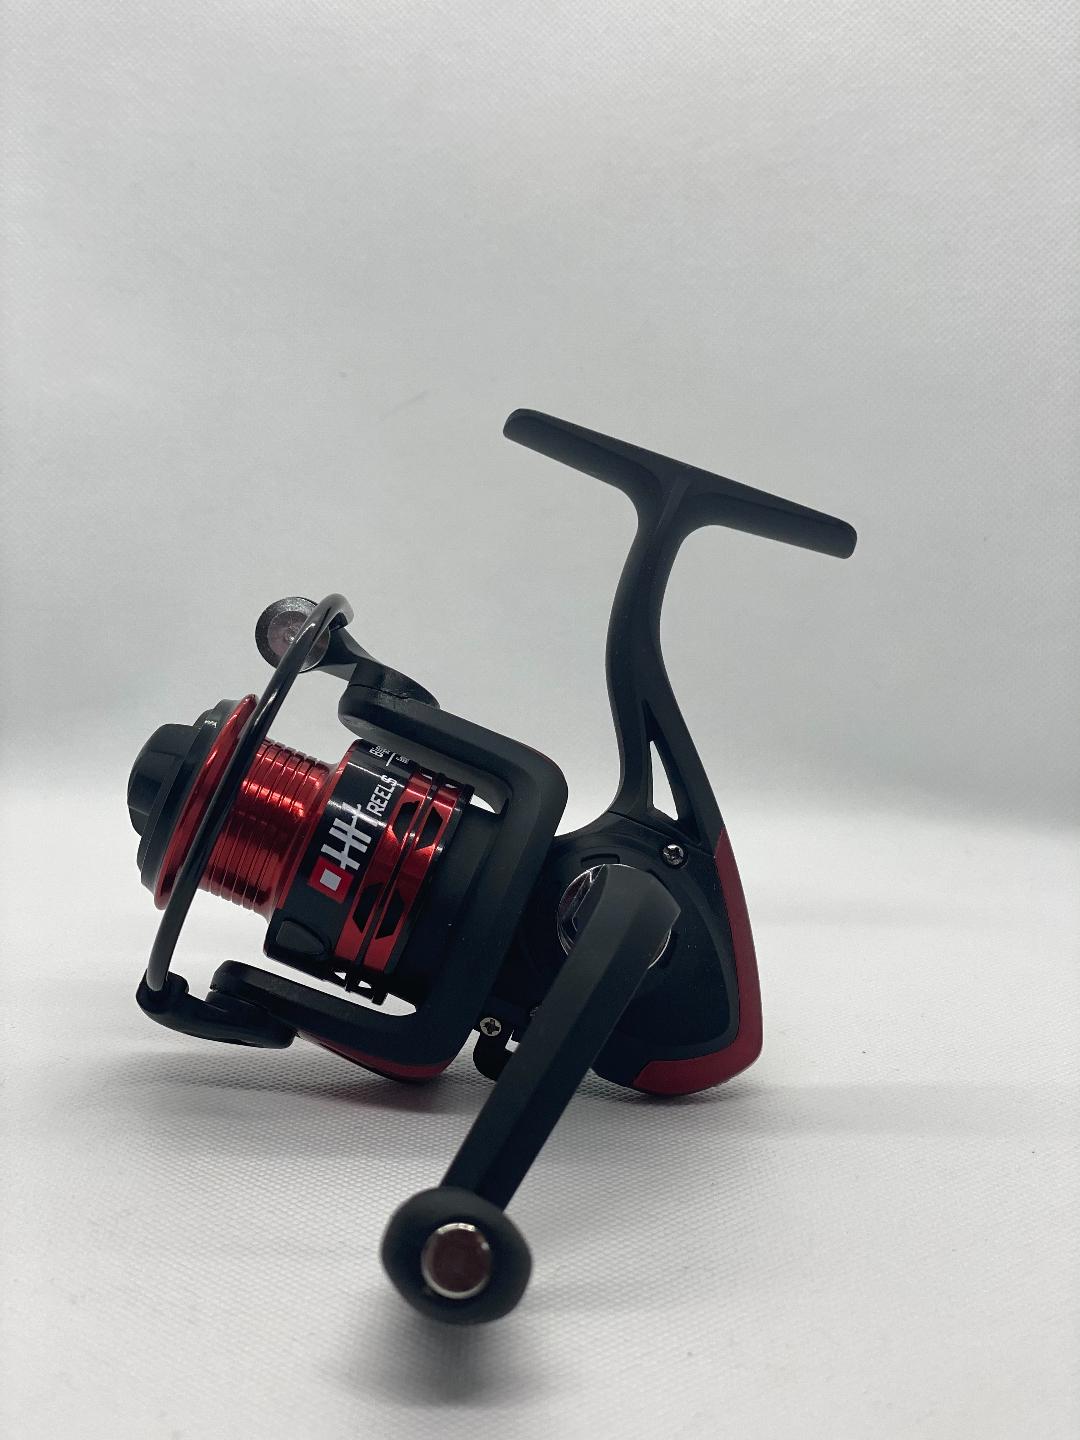 KF2000 Spinning Reel with Collapsible Handle